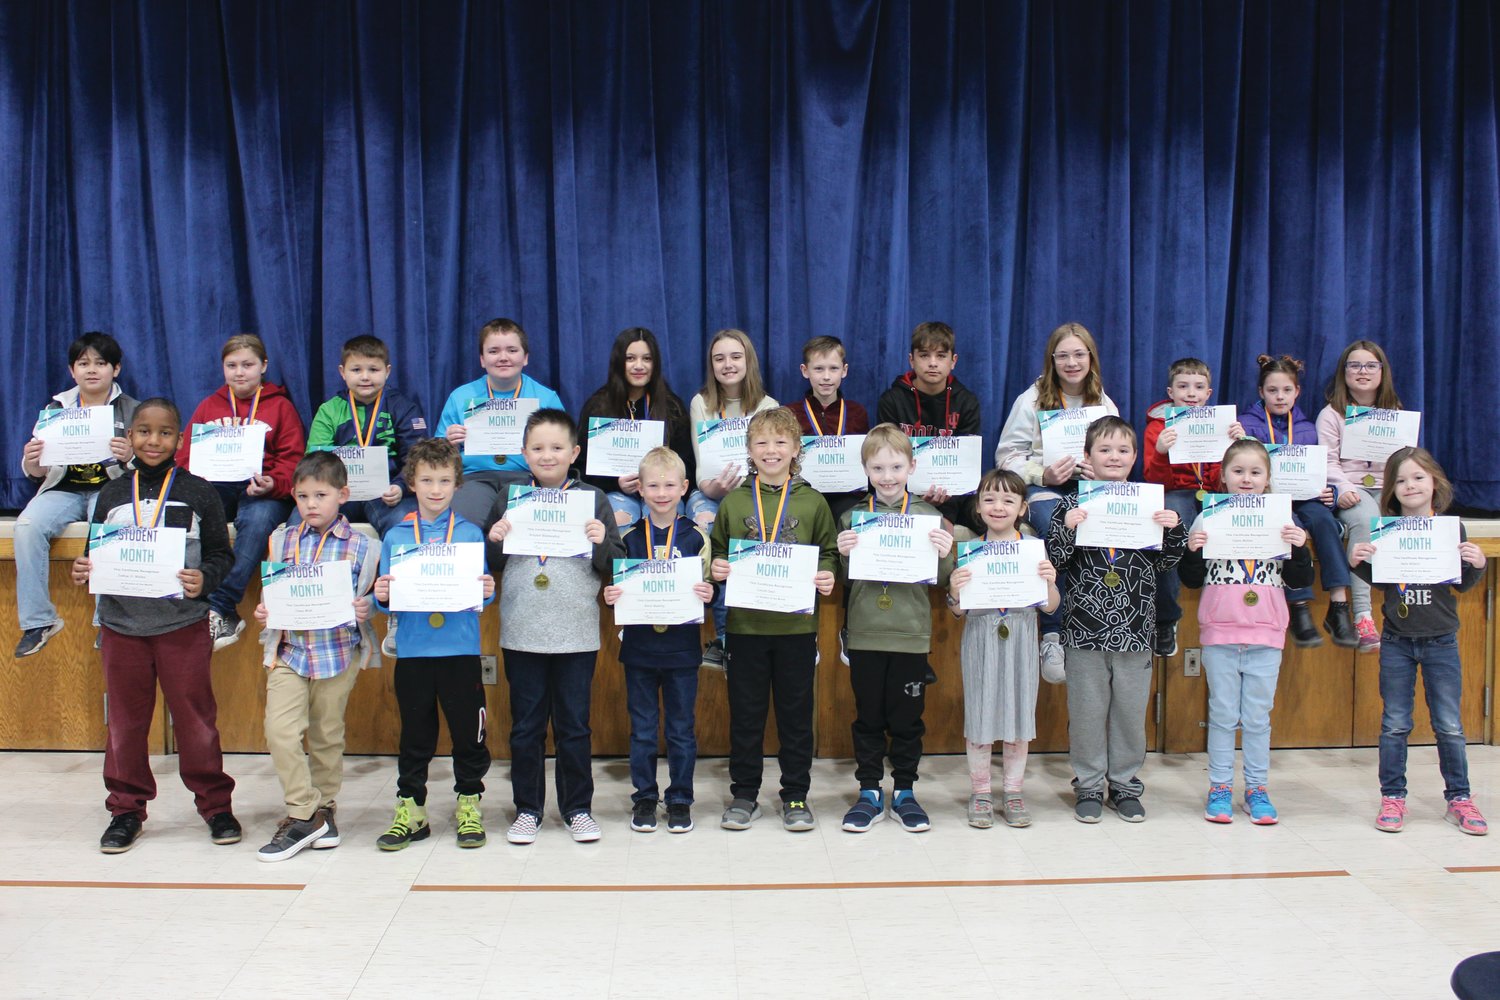 Students of the month for March at Southeast Fountain Elementary School are, from left, front row, Joshua Welles, Jesse Mink, Henry Kirkpatrick, Grayson Blankenship, Gavin Bowling, LJ Deel, Bentley Holycross, Zoey Hoffman, Anthony Larkin, Dayna Mullins and Aelin Willett; and back row, Tazio Rogers, Mariah Rayphole, Logan Rodgers, Colt Nelson, Solange Herrera-Gil, Harmony Hargrave, Preston Good, Gavin McCollum, Cassandra Wildman, Colin Rogers, Aubrey Switzer and Avery Austin.